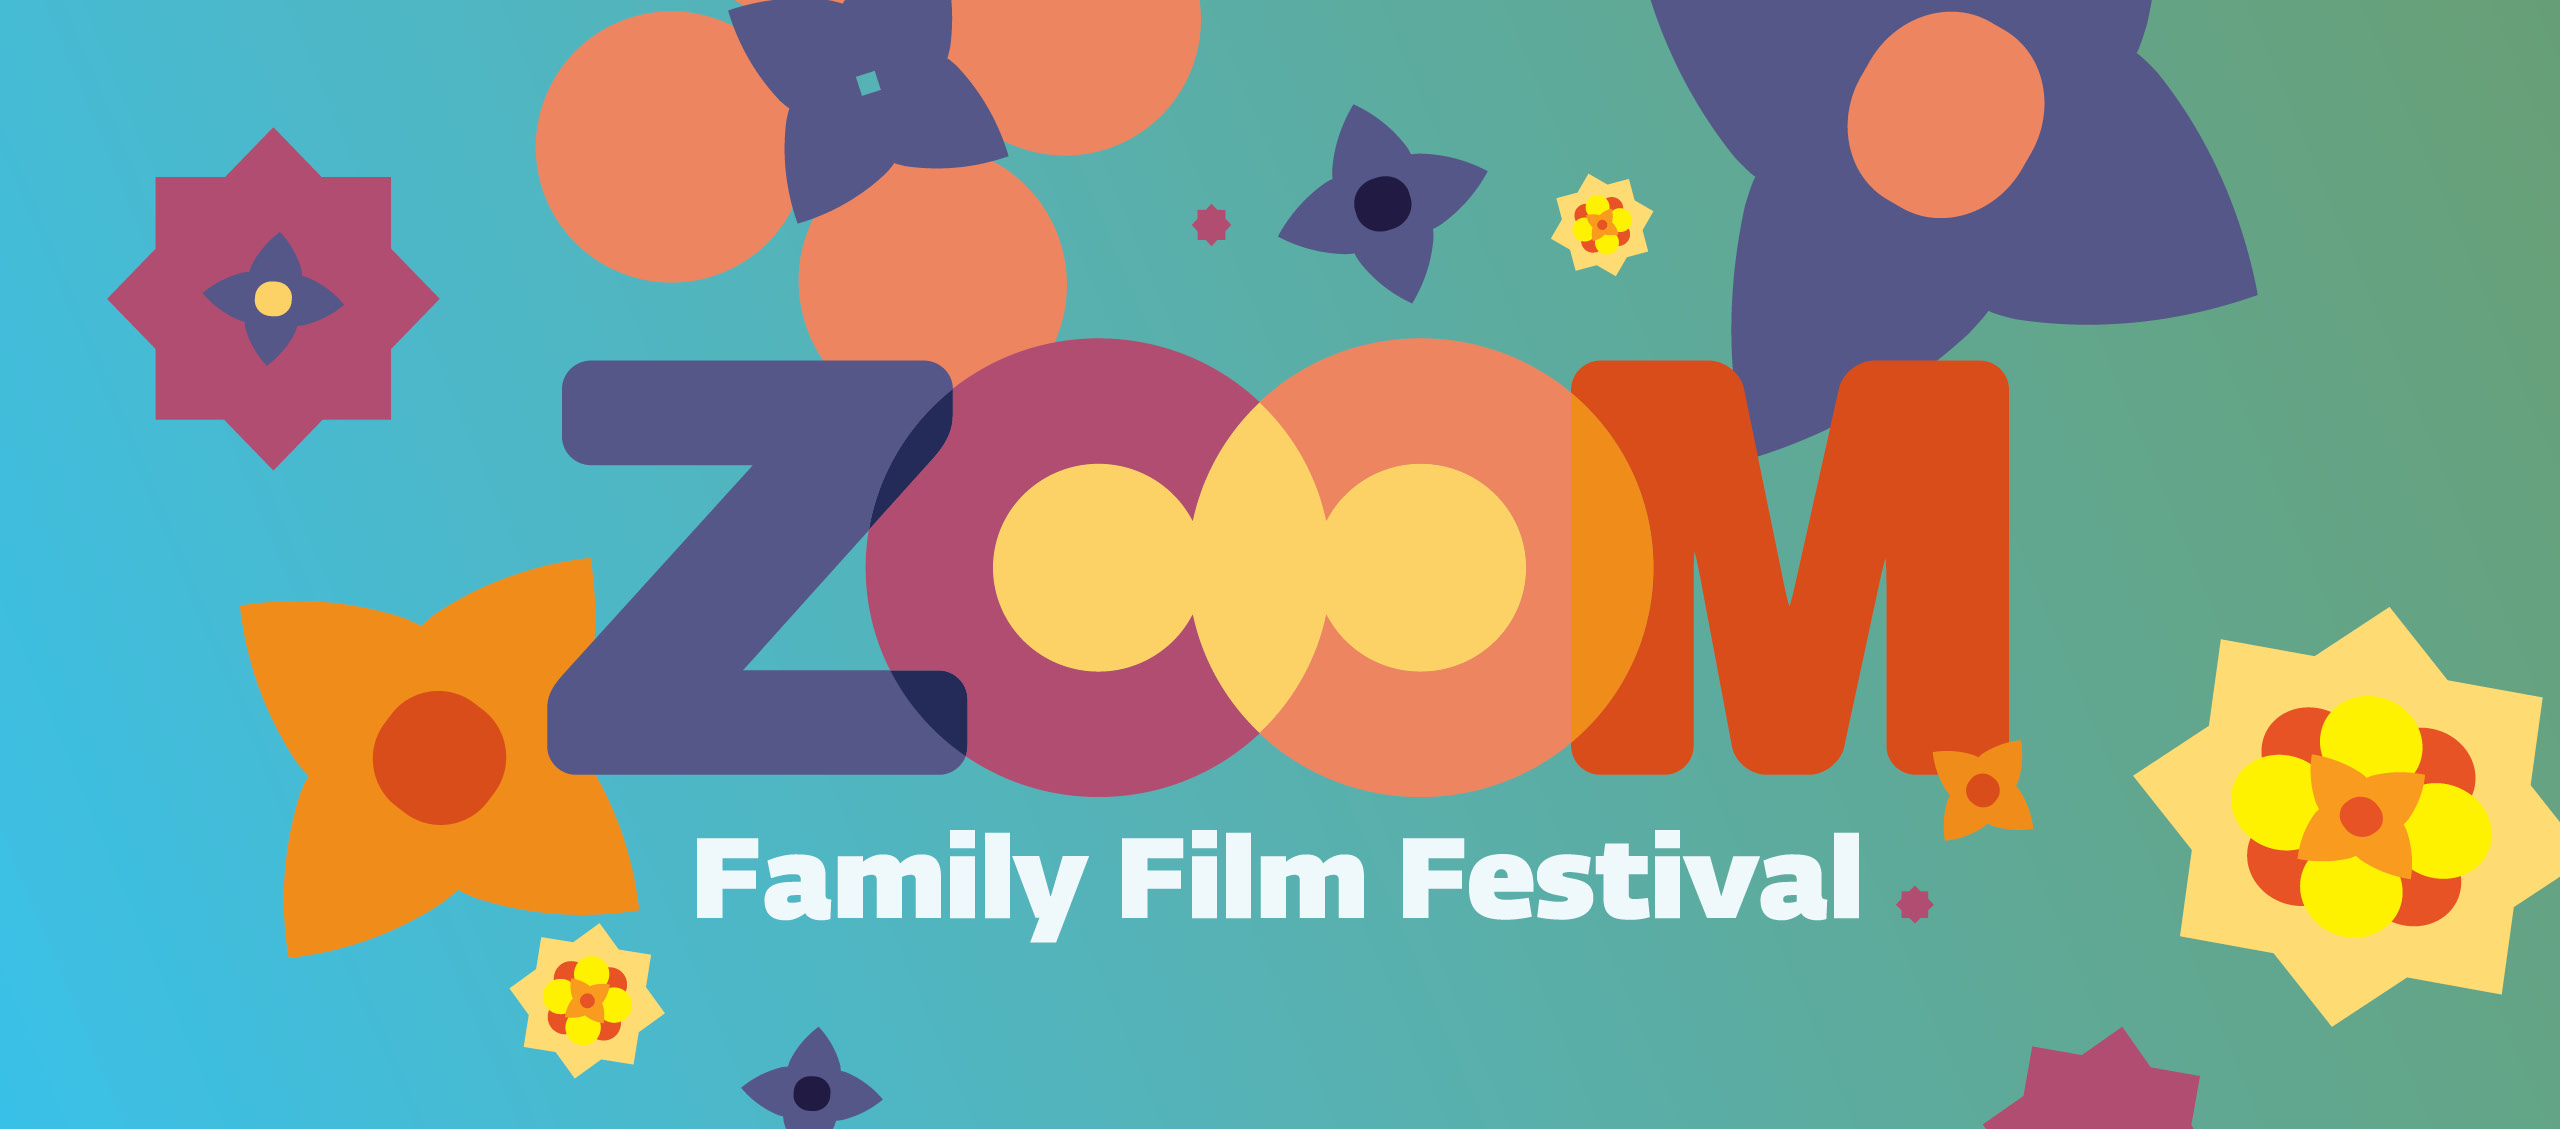 A graphic treatment of the title Zoom: Family Film Festival in multicolored letters set against a turquoise background with stylized flower shapes